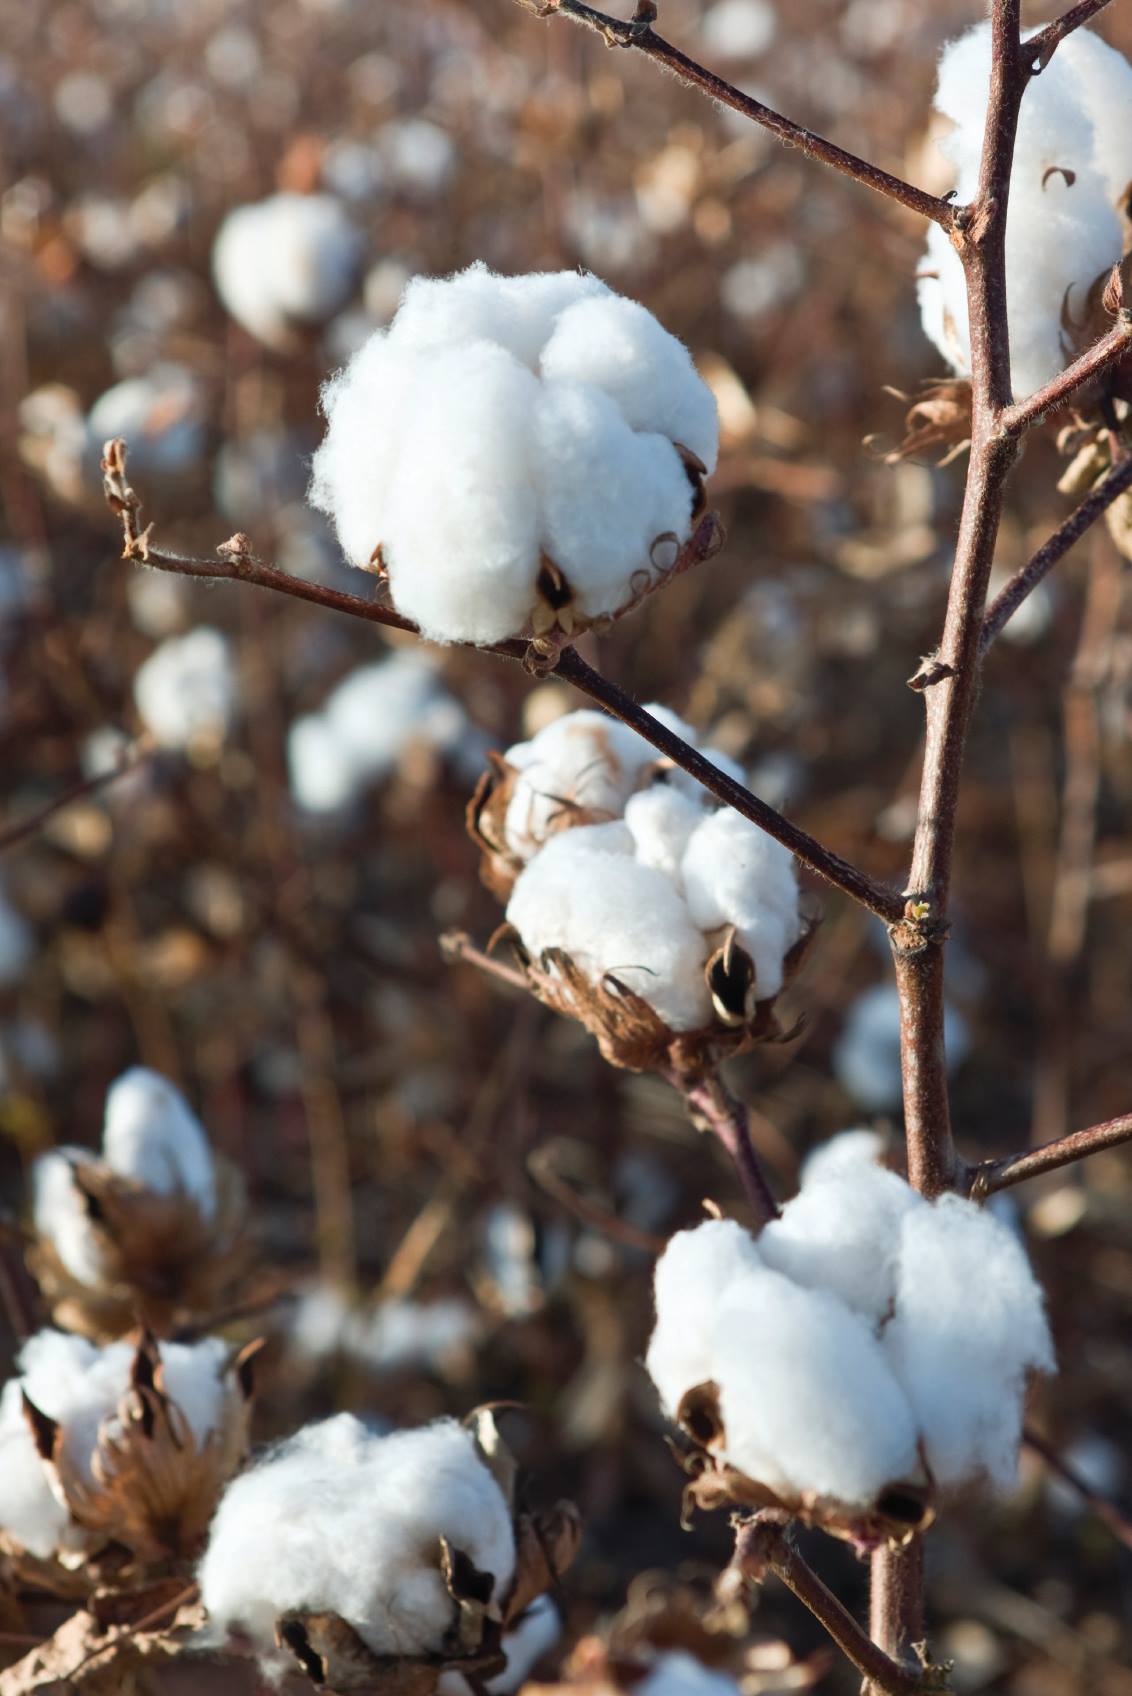 Cotton Contracting Considerations - Texas Agriculture Law